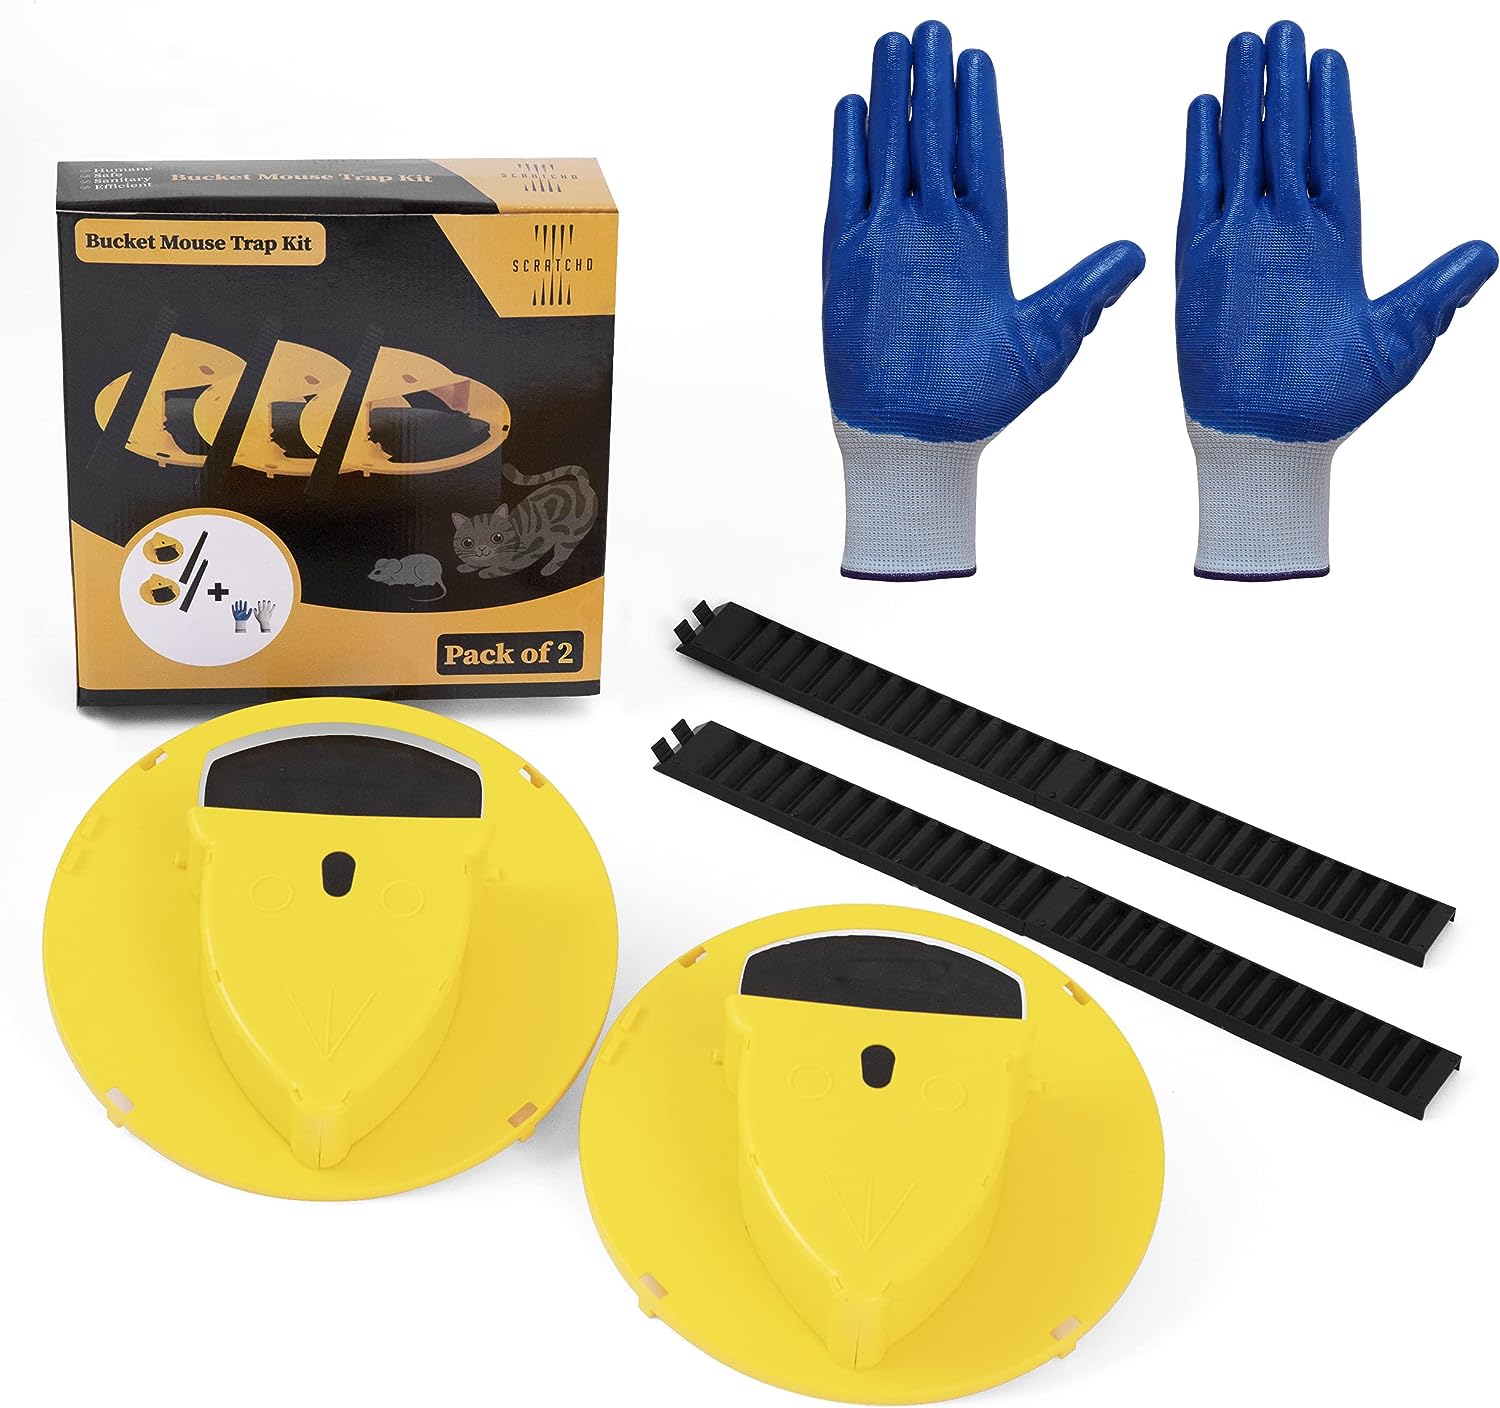 SCRATCHD 2 Pack Bucket Mouse Trap with Gloves, Flip N [...]